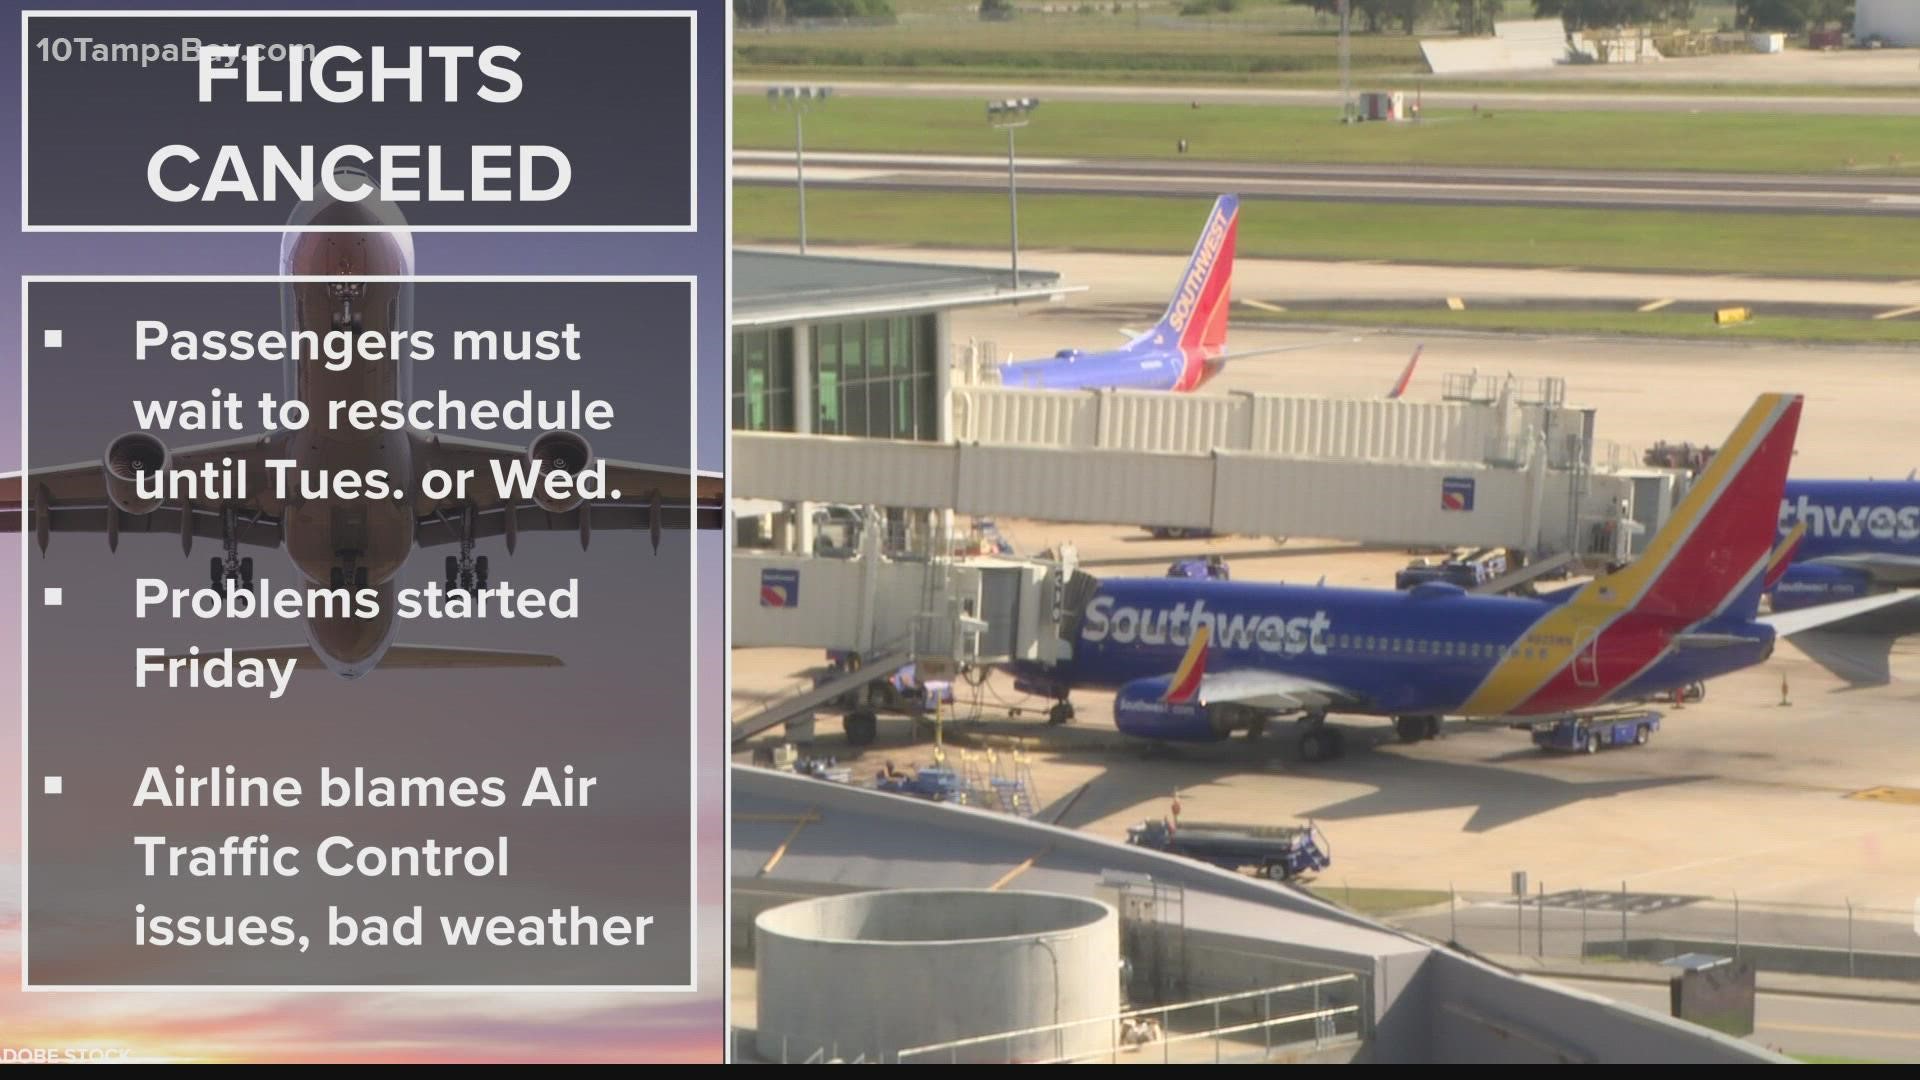 The airline has canceled more than 1,000 weekend flights, according to flight tracker FlightAware.